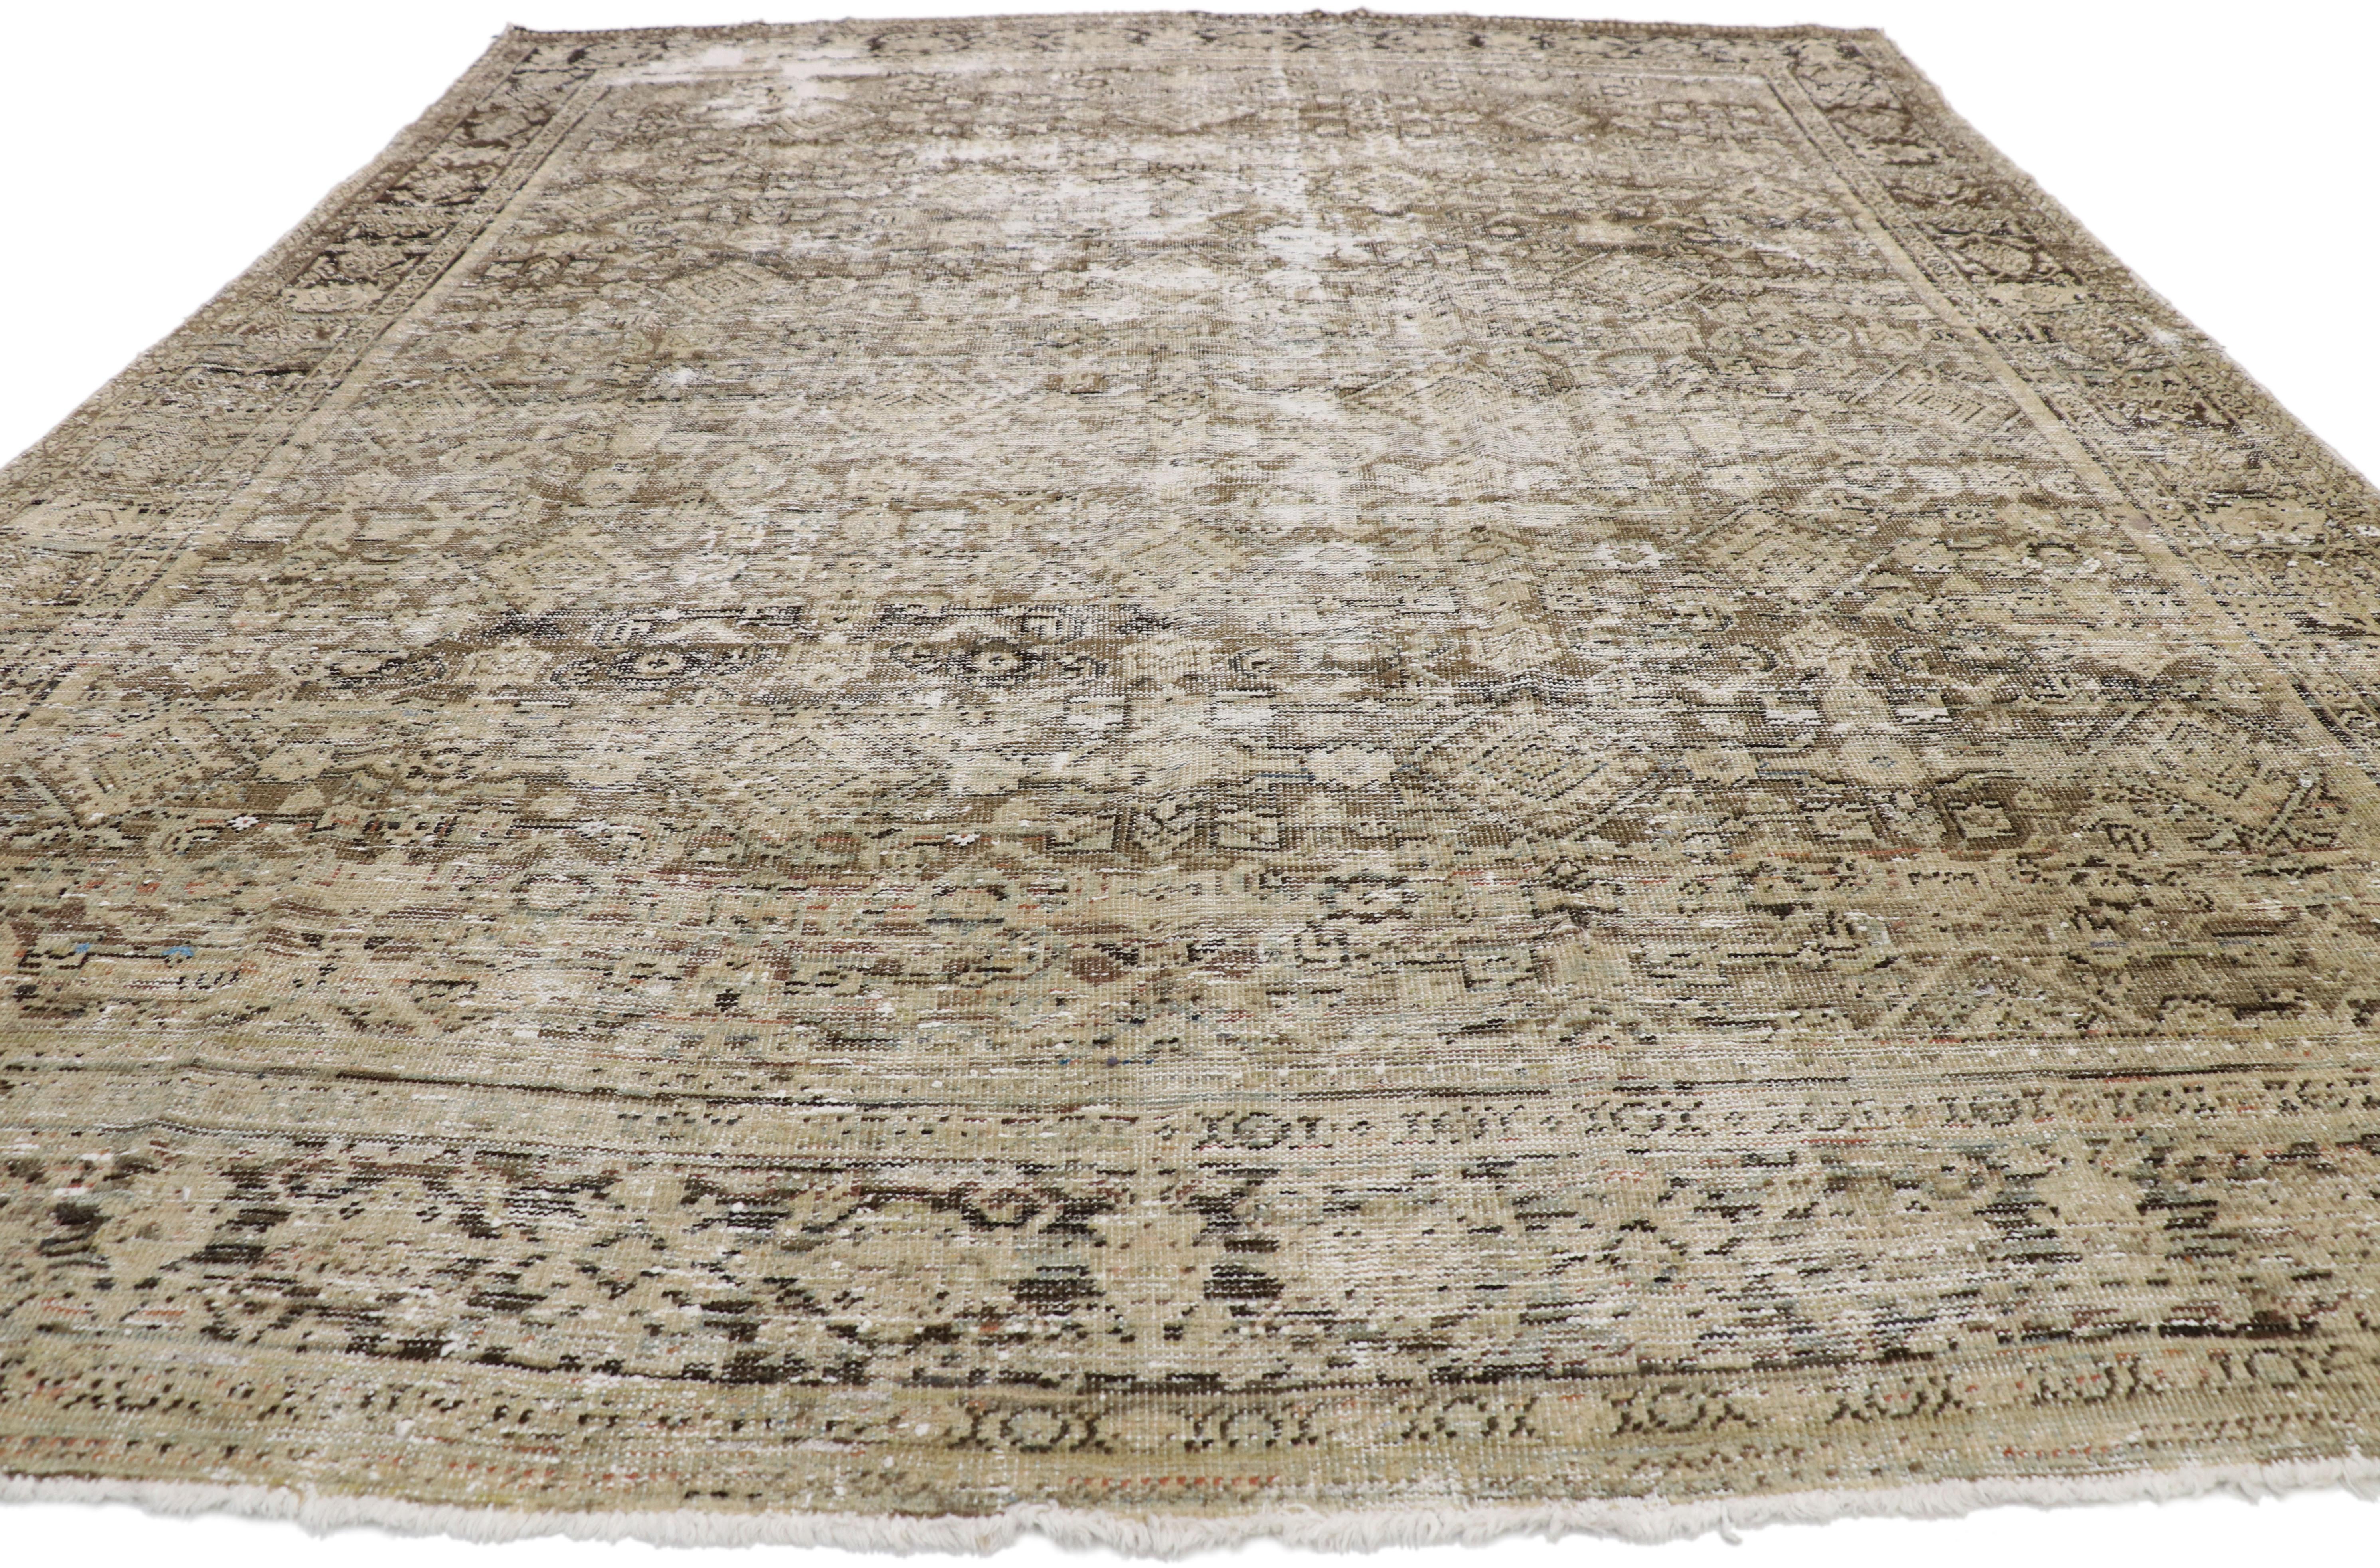 Malayer Distressed Antique Persian Mahal Rug with Modern Rustic English Manor Style For Sale